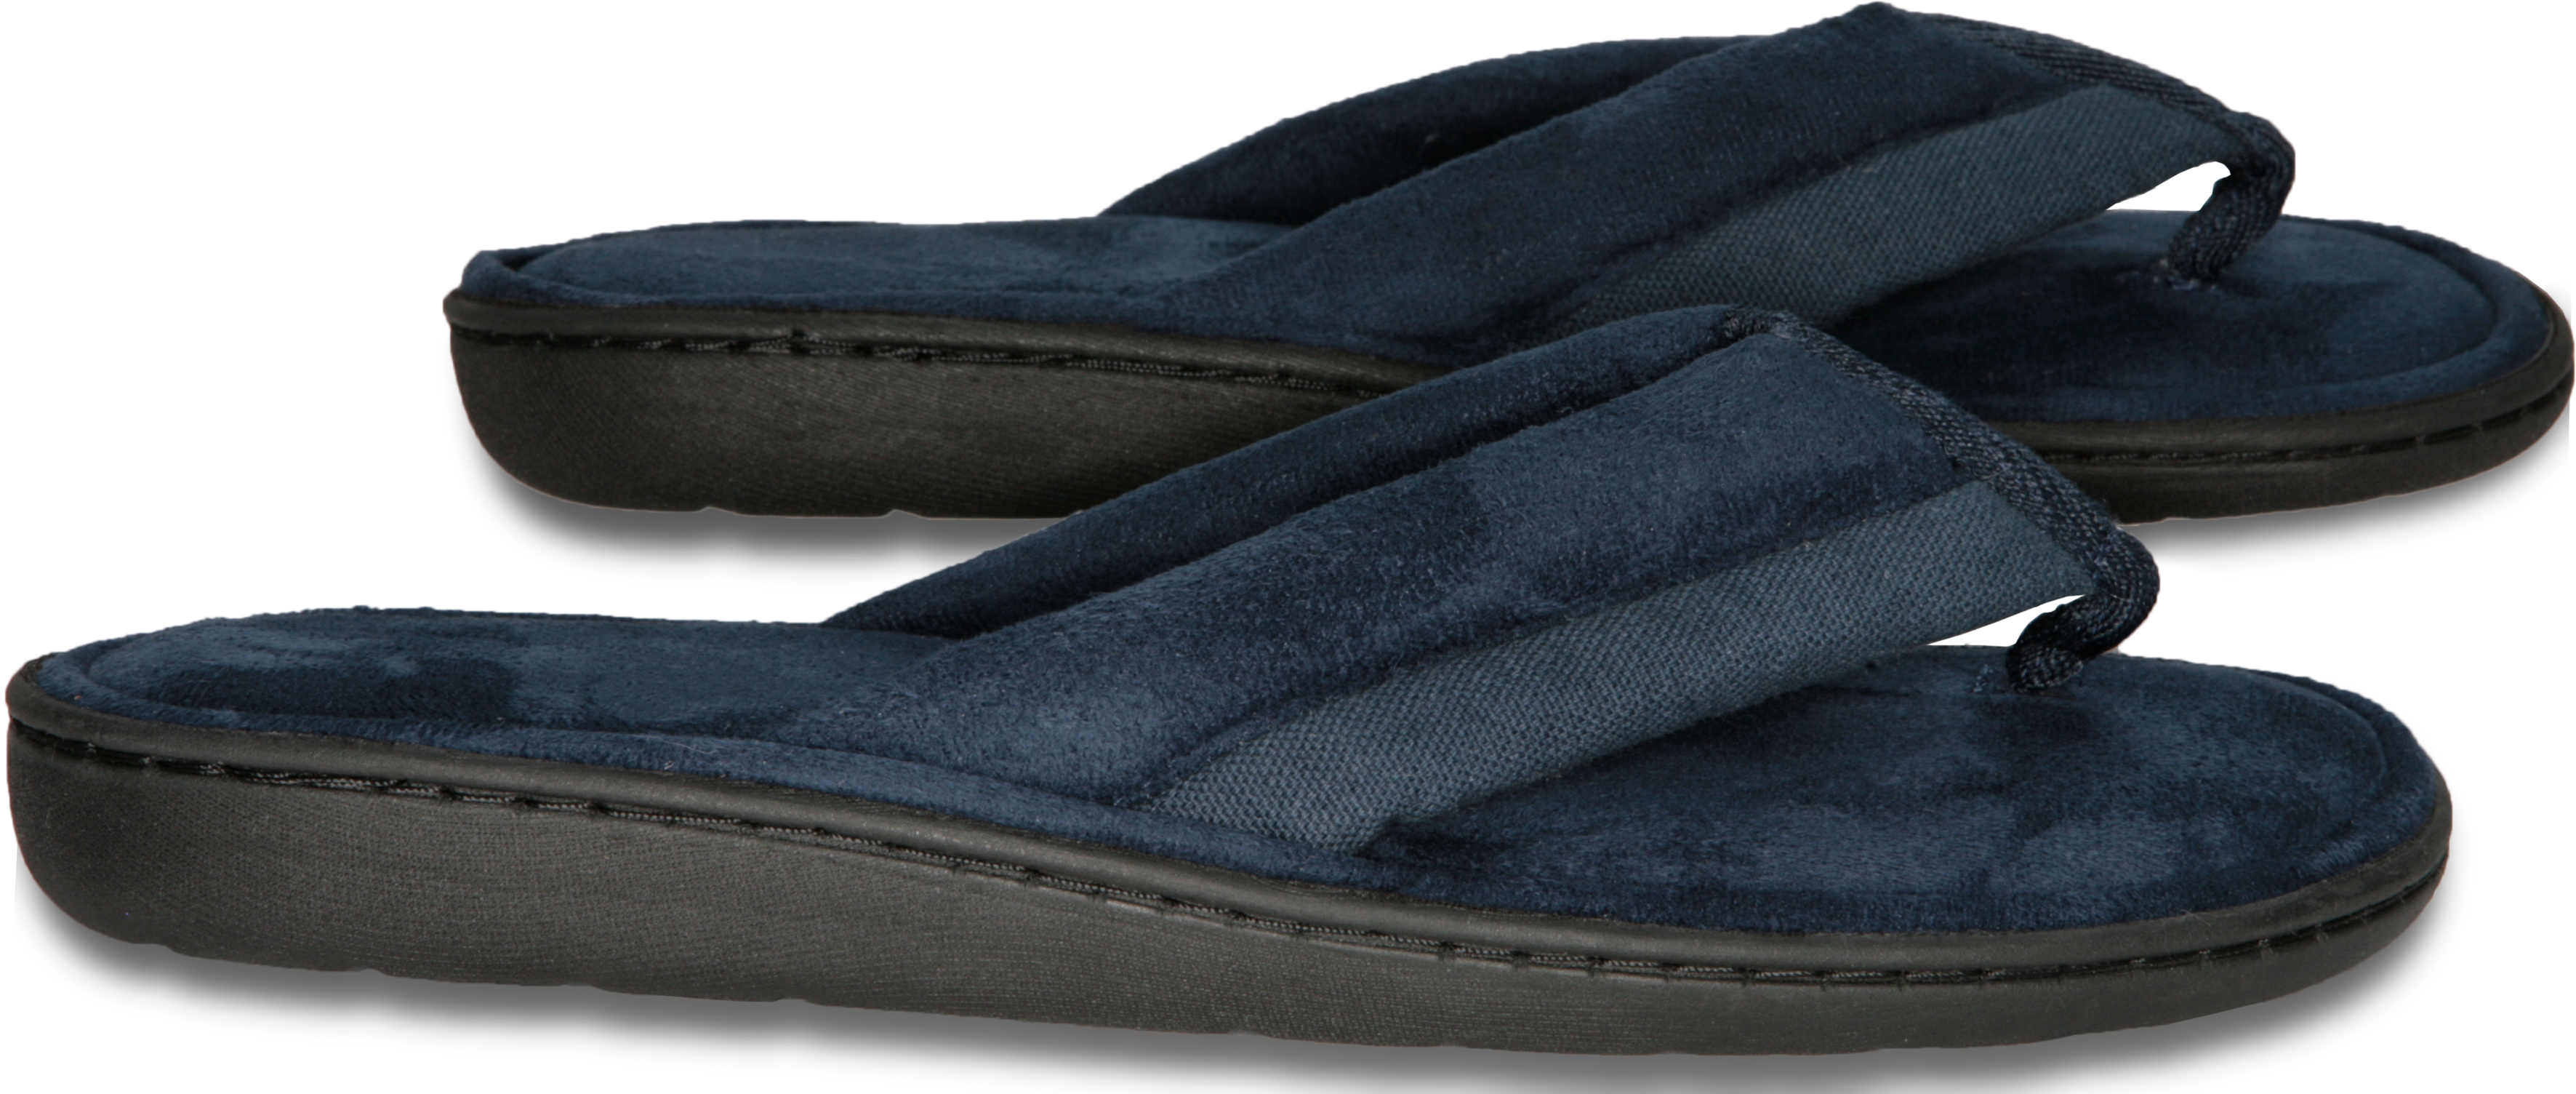 Deluxe Comfort Mens Memory Foam Slipper, Size 11-12 - Soft Linen 120D SBR Insole & Rubber Outsole - Pure Suede Shoes - Non Marking Sole - Mens Slippers, Blue - image 2 of 4